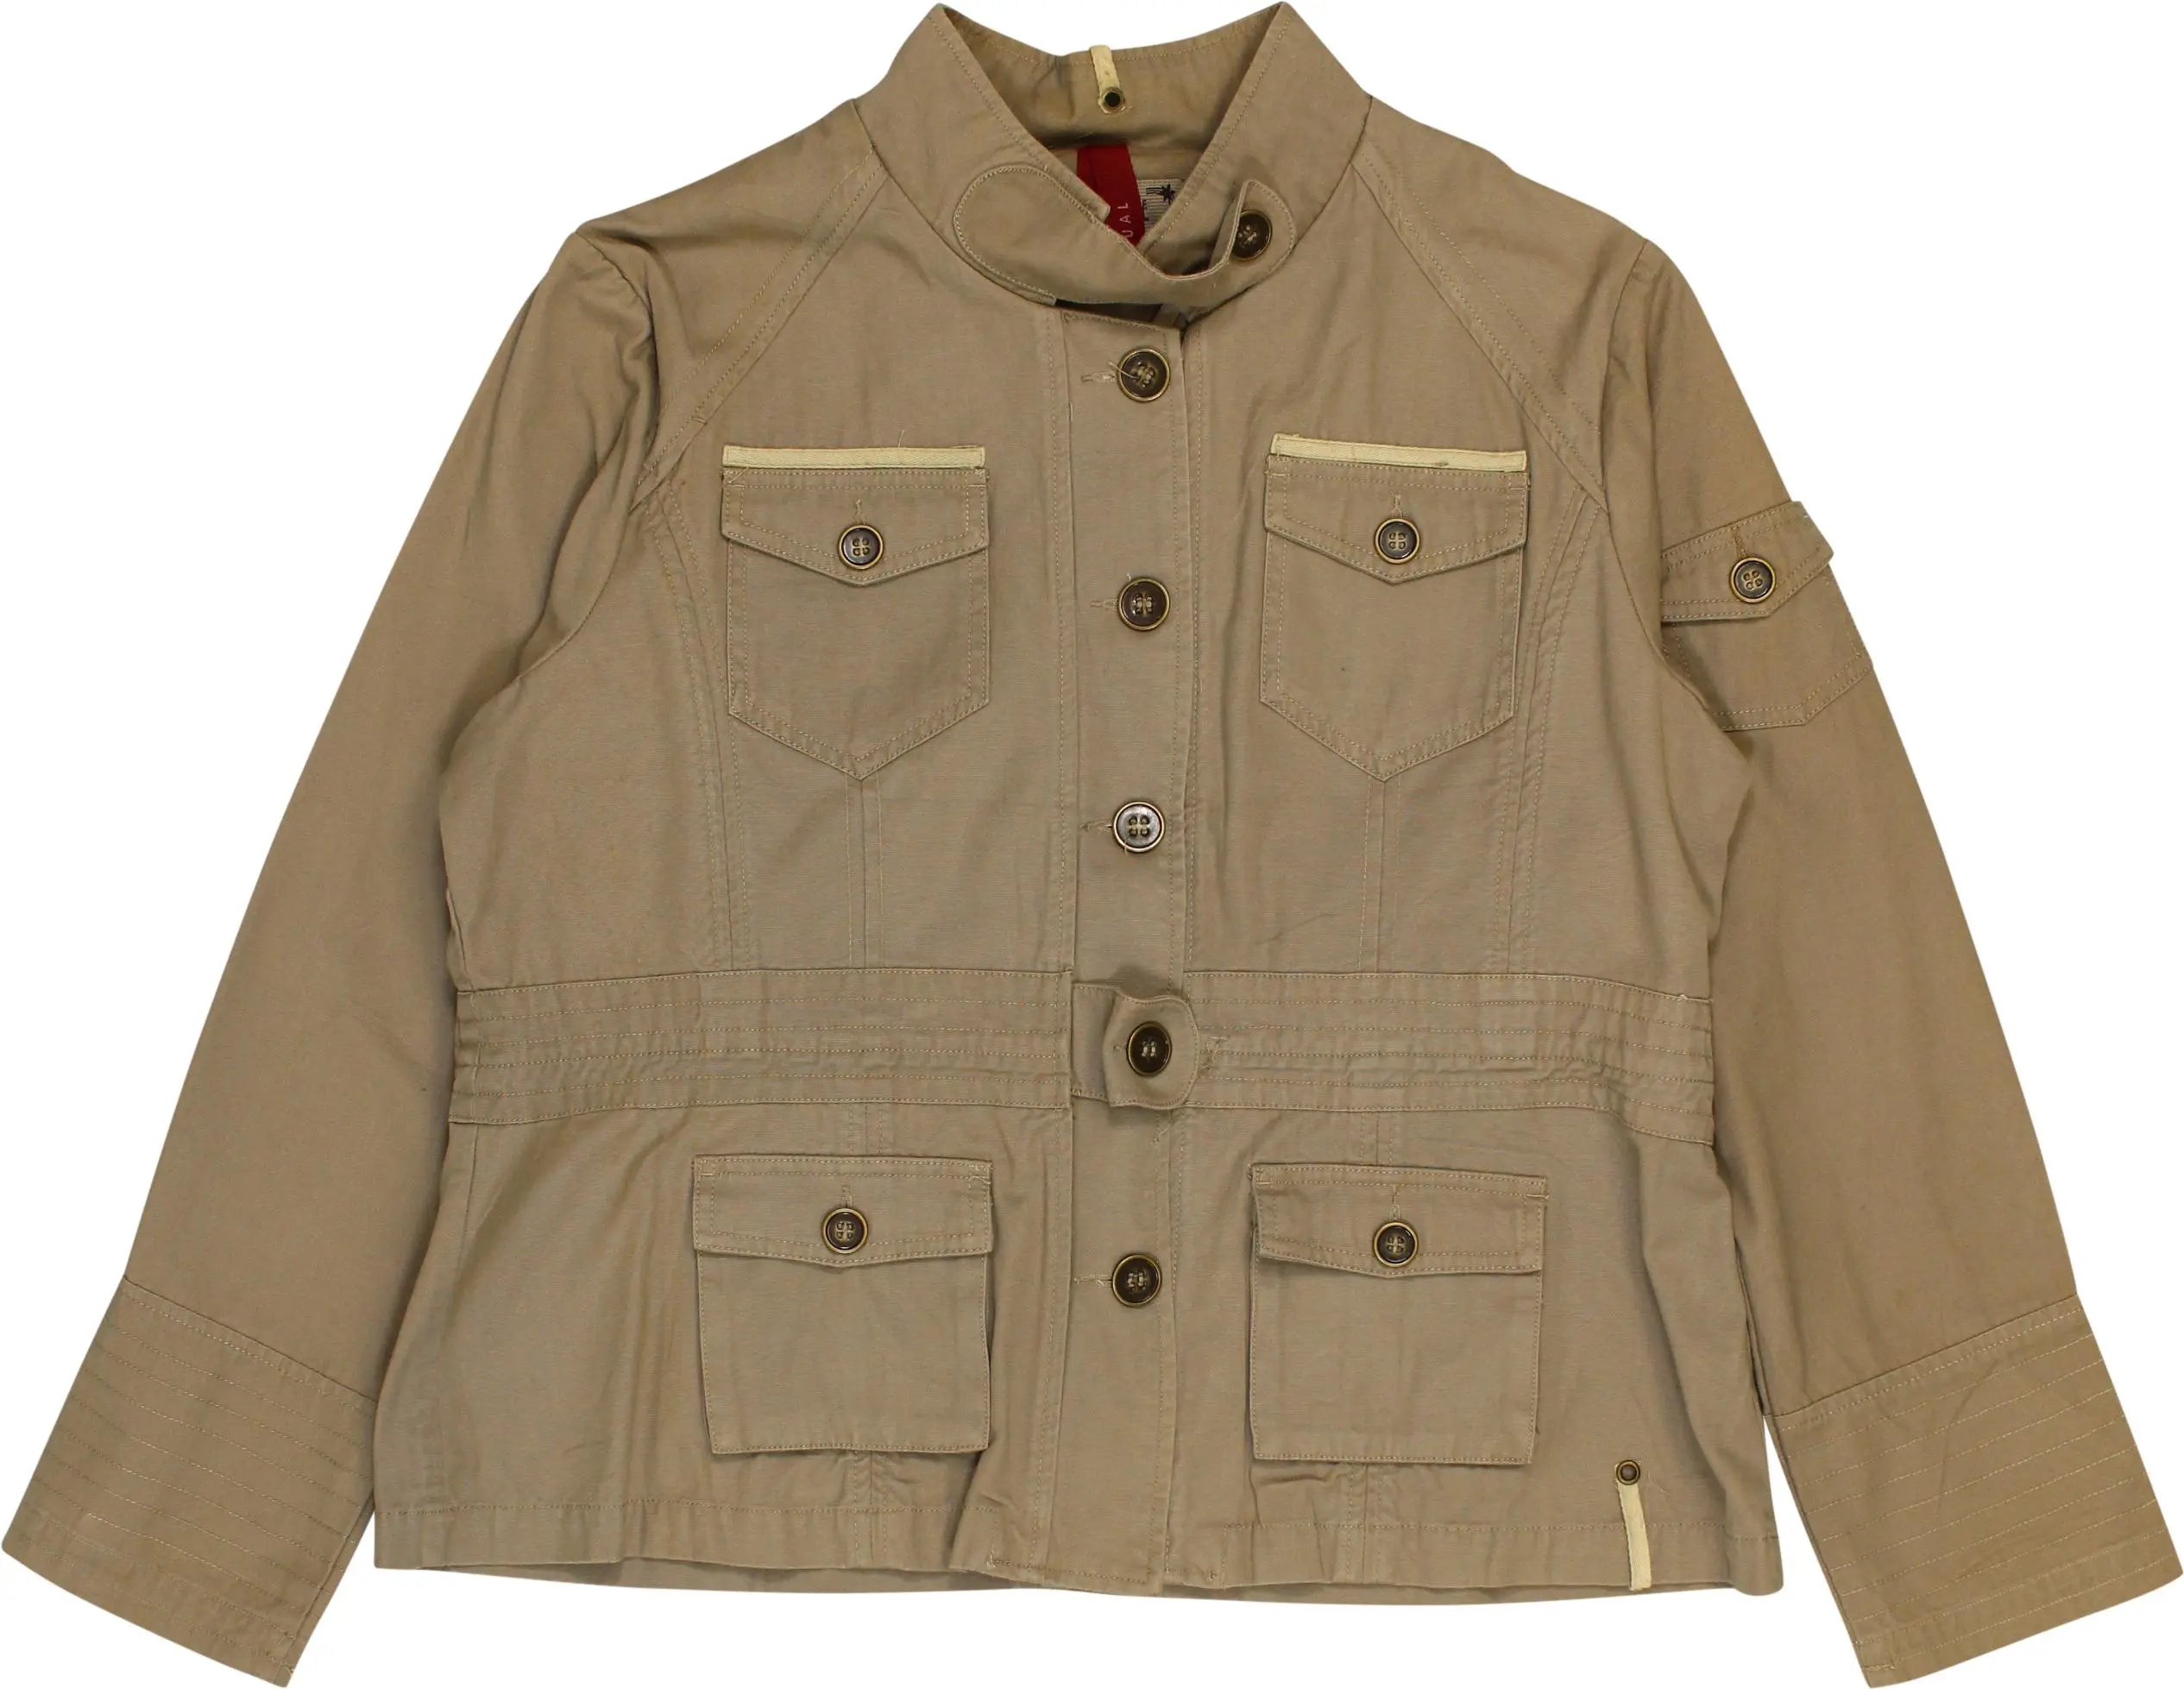 Steve Ketell - Outerwear Jacket- ThriftTale.com - Vintage and second handclothing